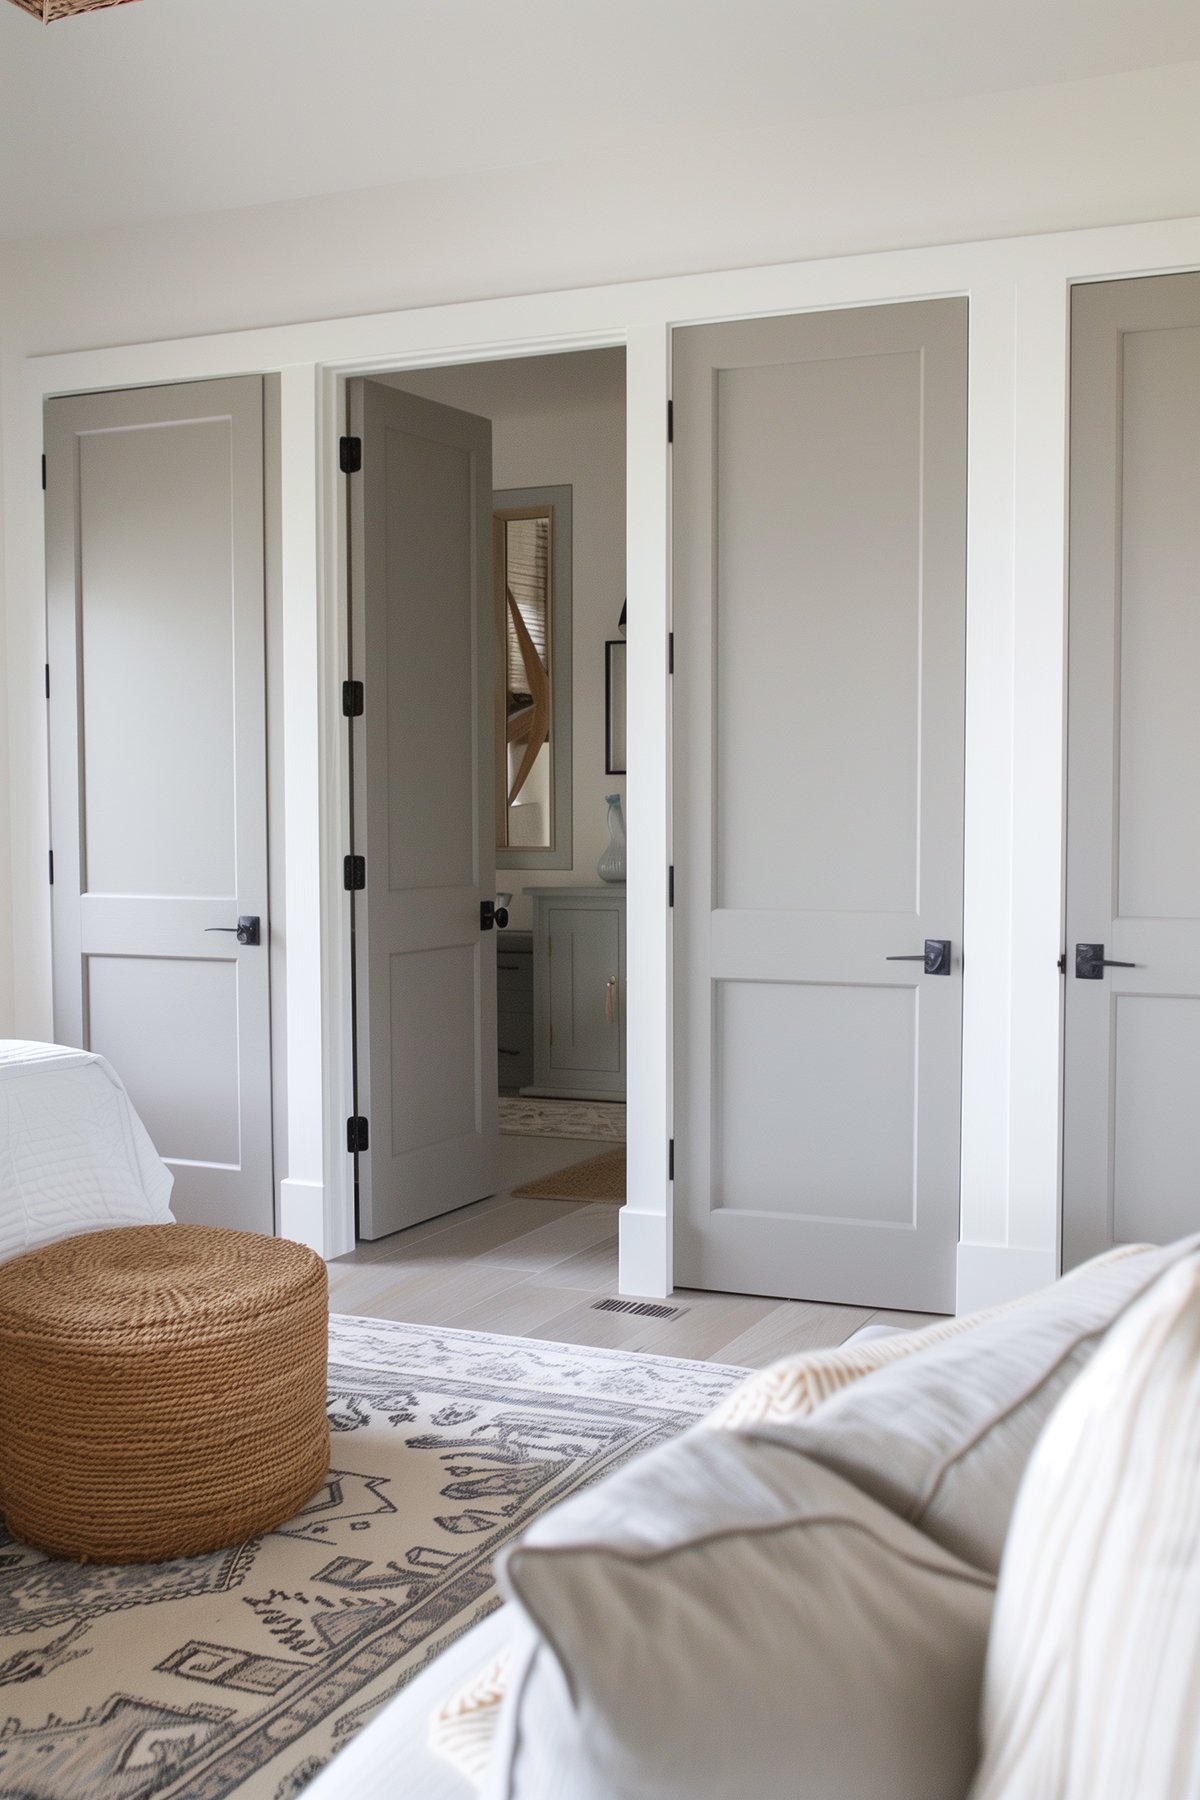 A bedroom with light gray walls and closet and bathroom doors painted Benjamin Moore Stone Hearth.